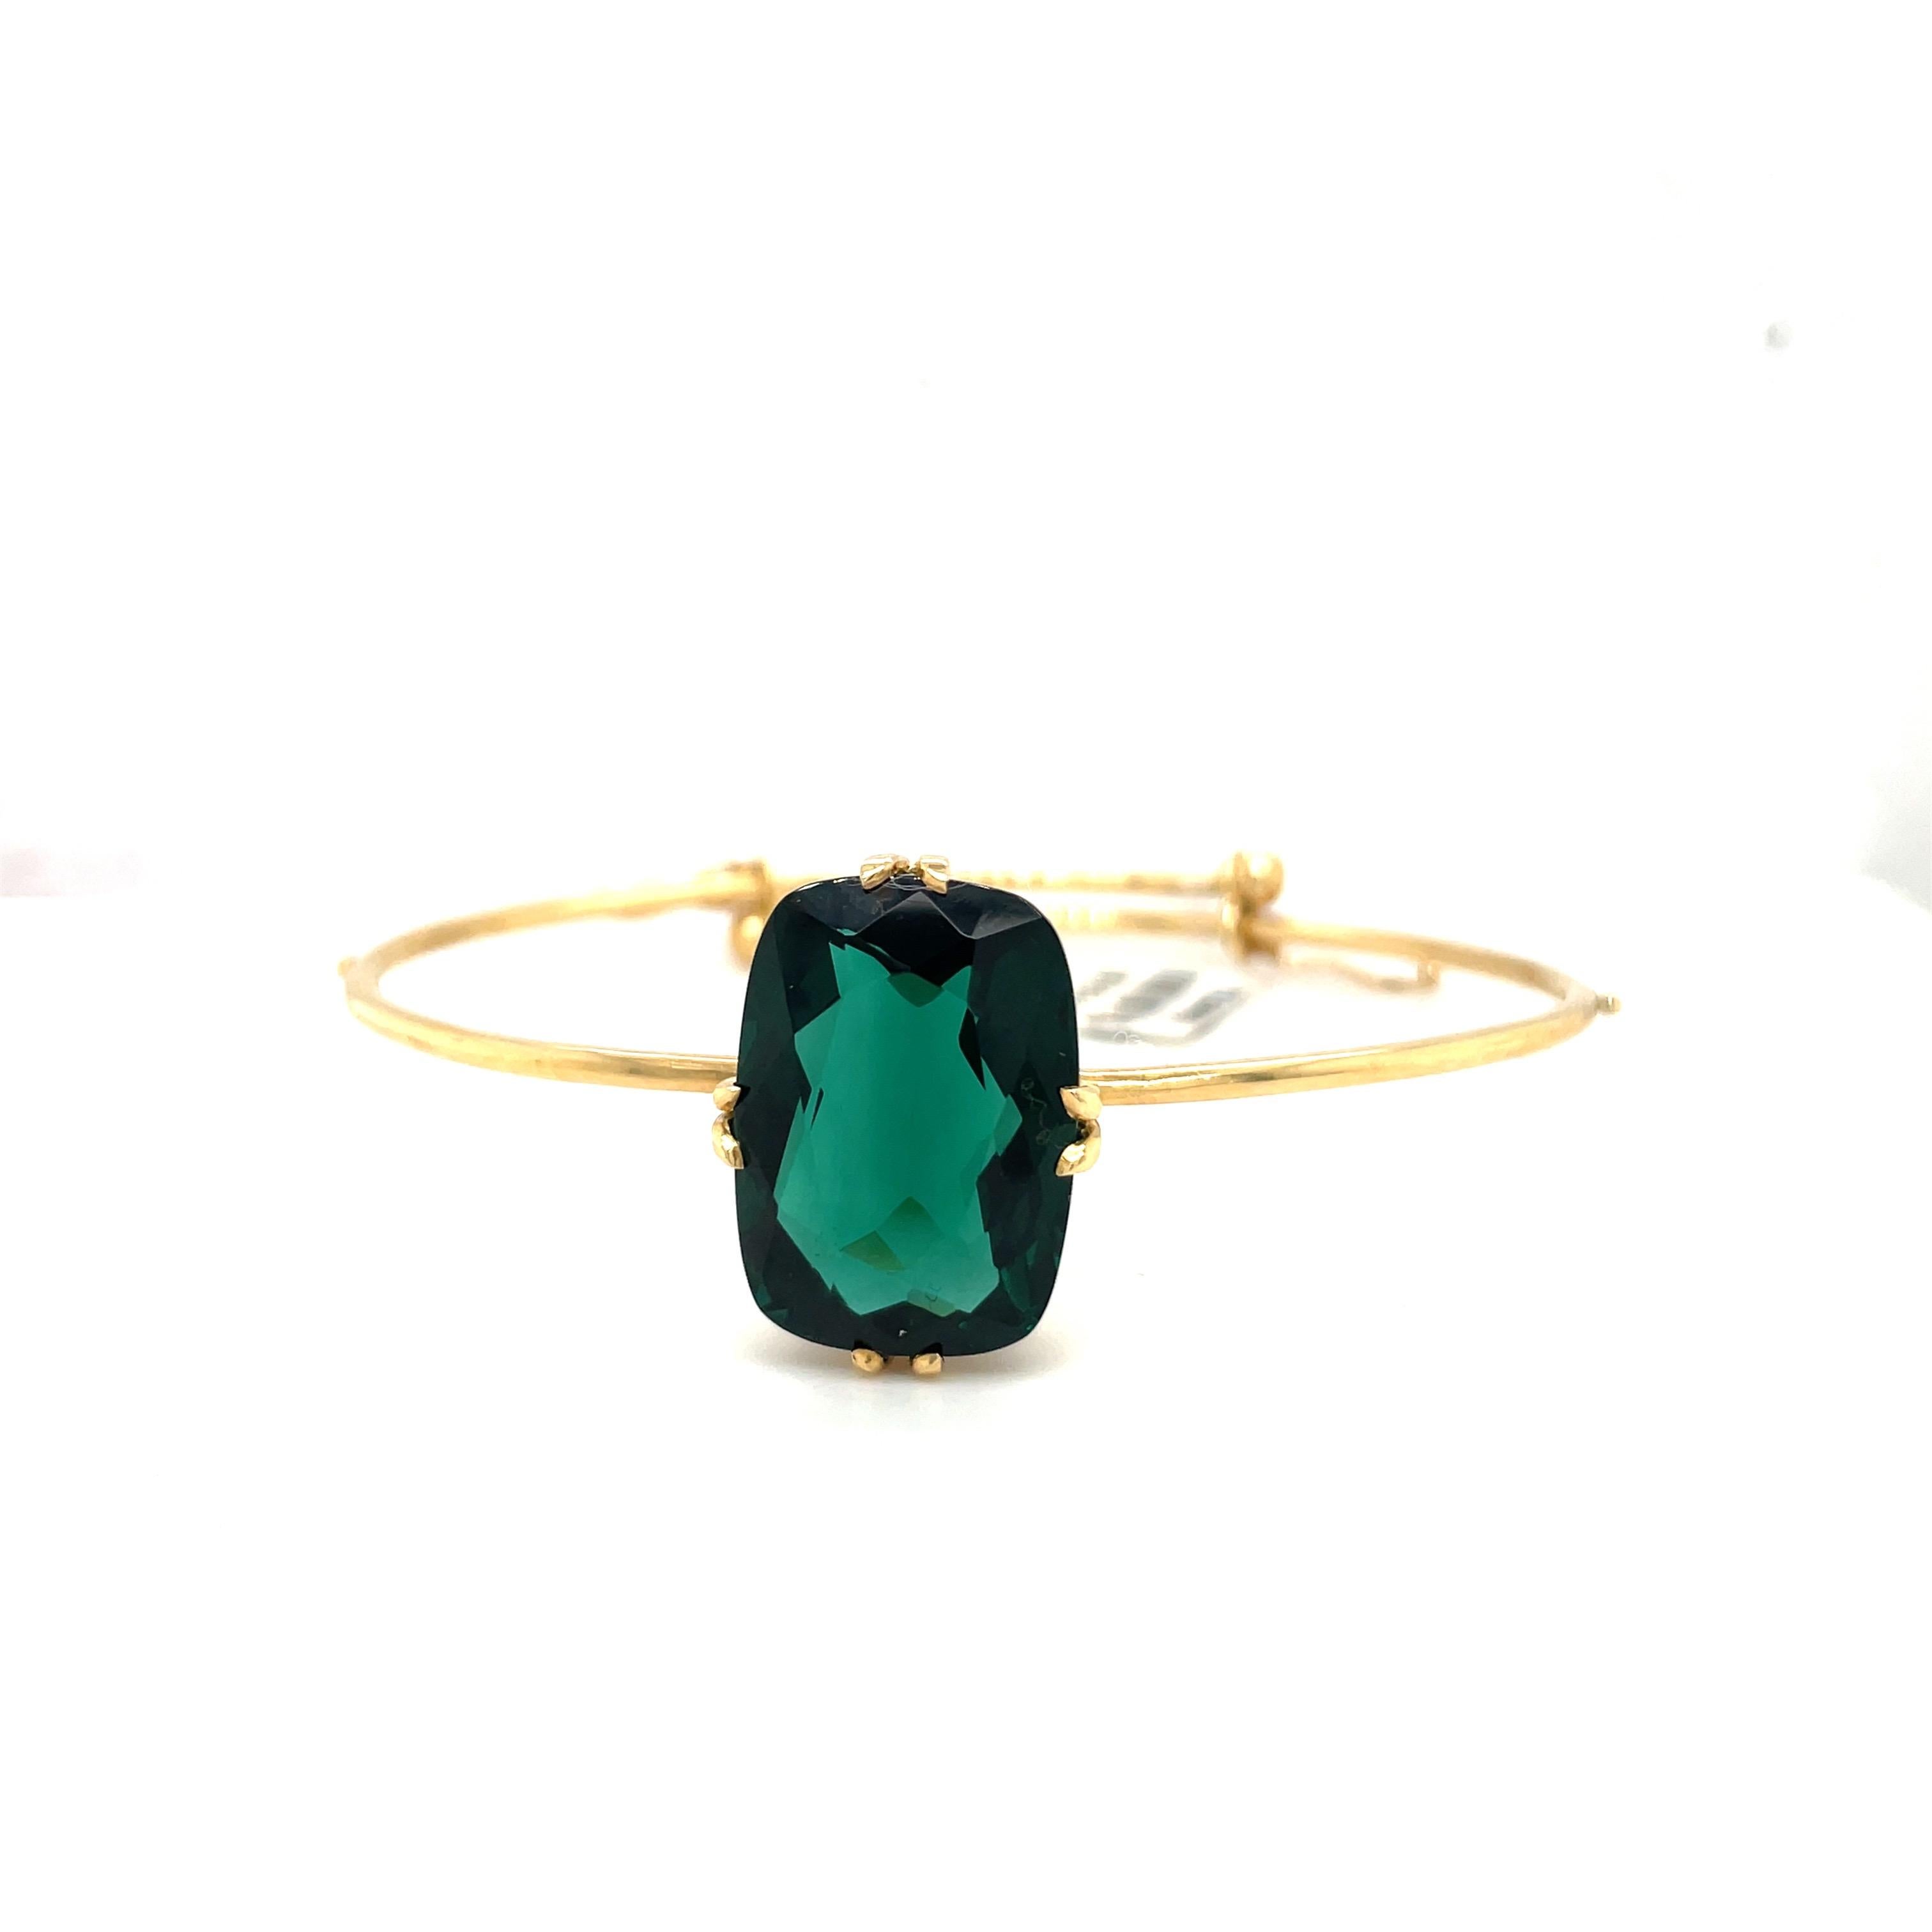 Magnificent 18 karat yellow gold bangle bracelet featuring a 15.72 carat cushion cut green quartz center stone. The bangle bracelet slips on and is fully adjustable.
Made exclusively for Cellini NYC